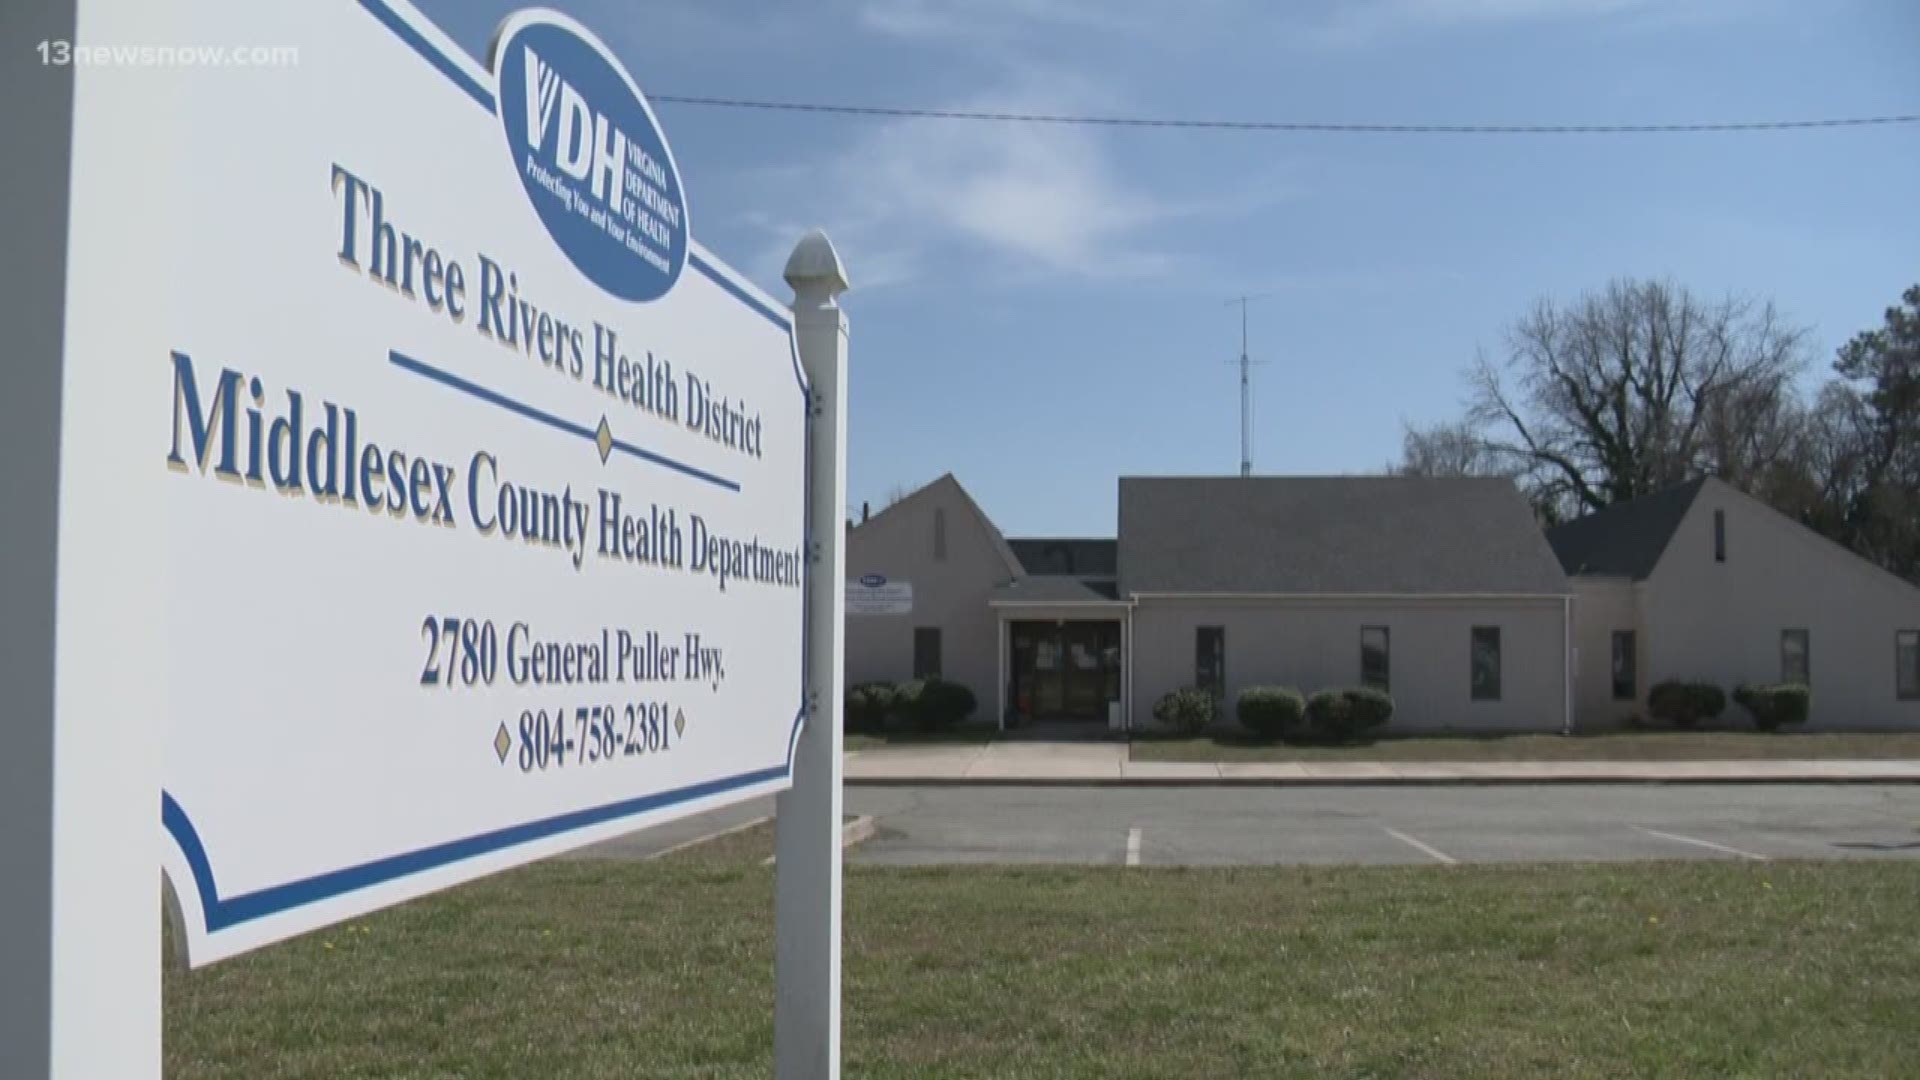 After a child tested positive for coronavirus in Gloucester, health officials took measures to quarantine anyone they might have had contact with.